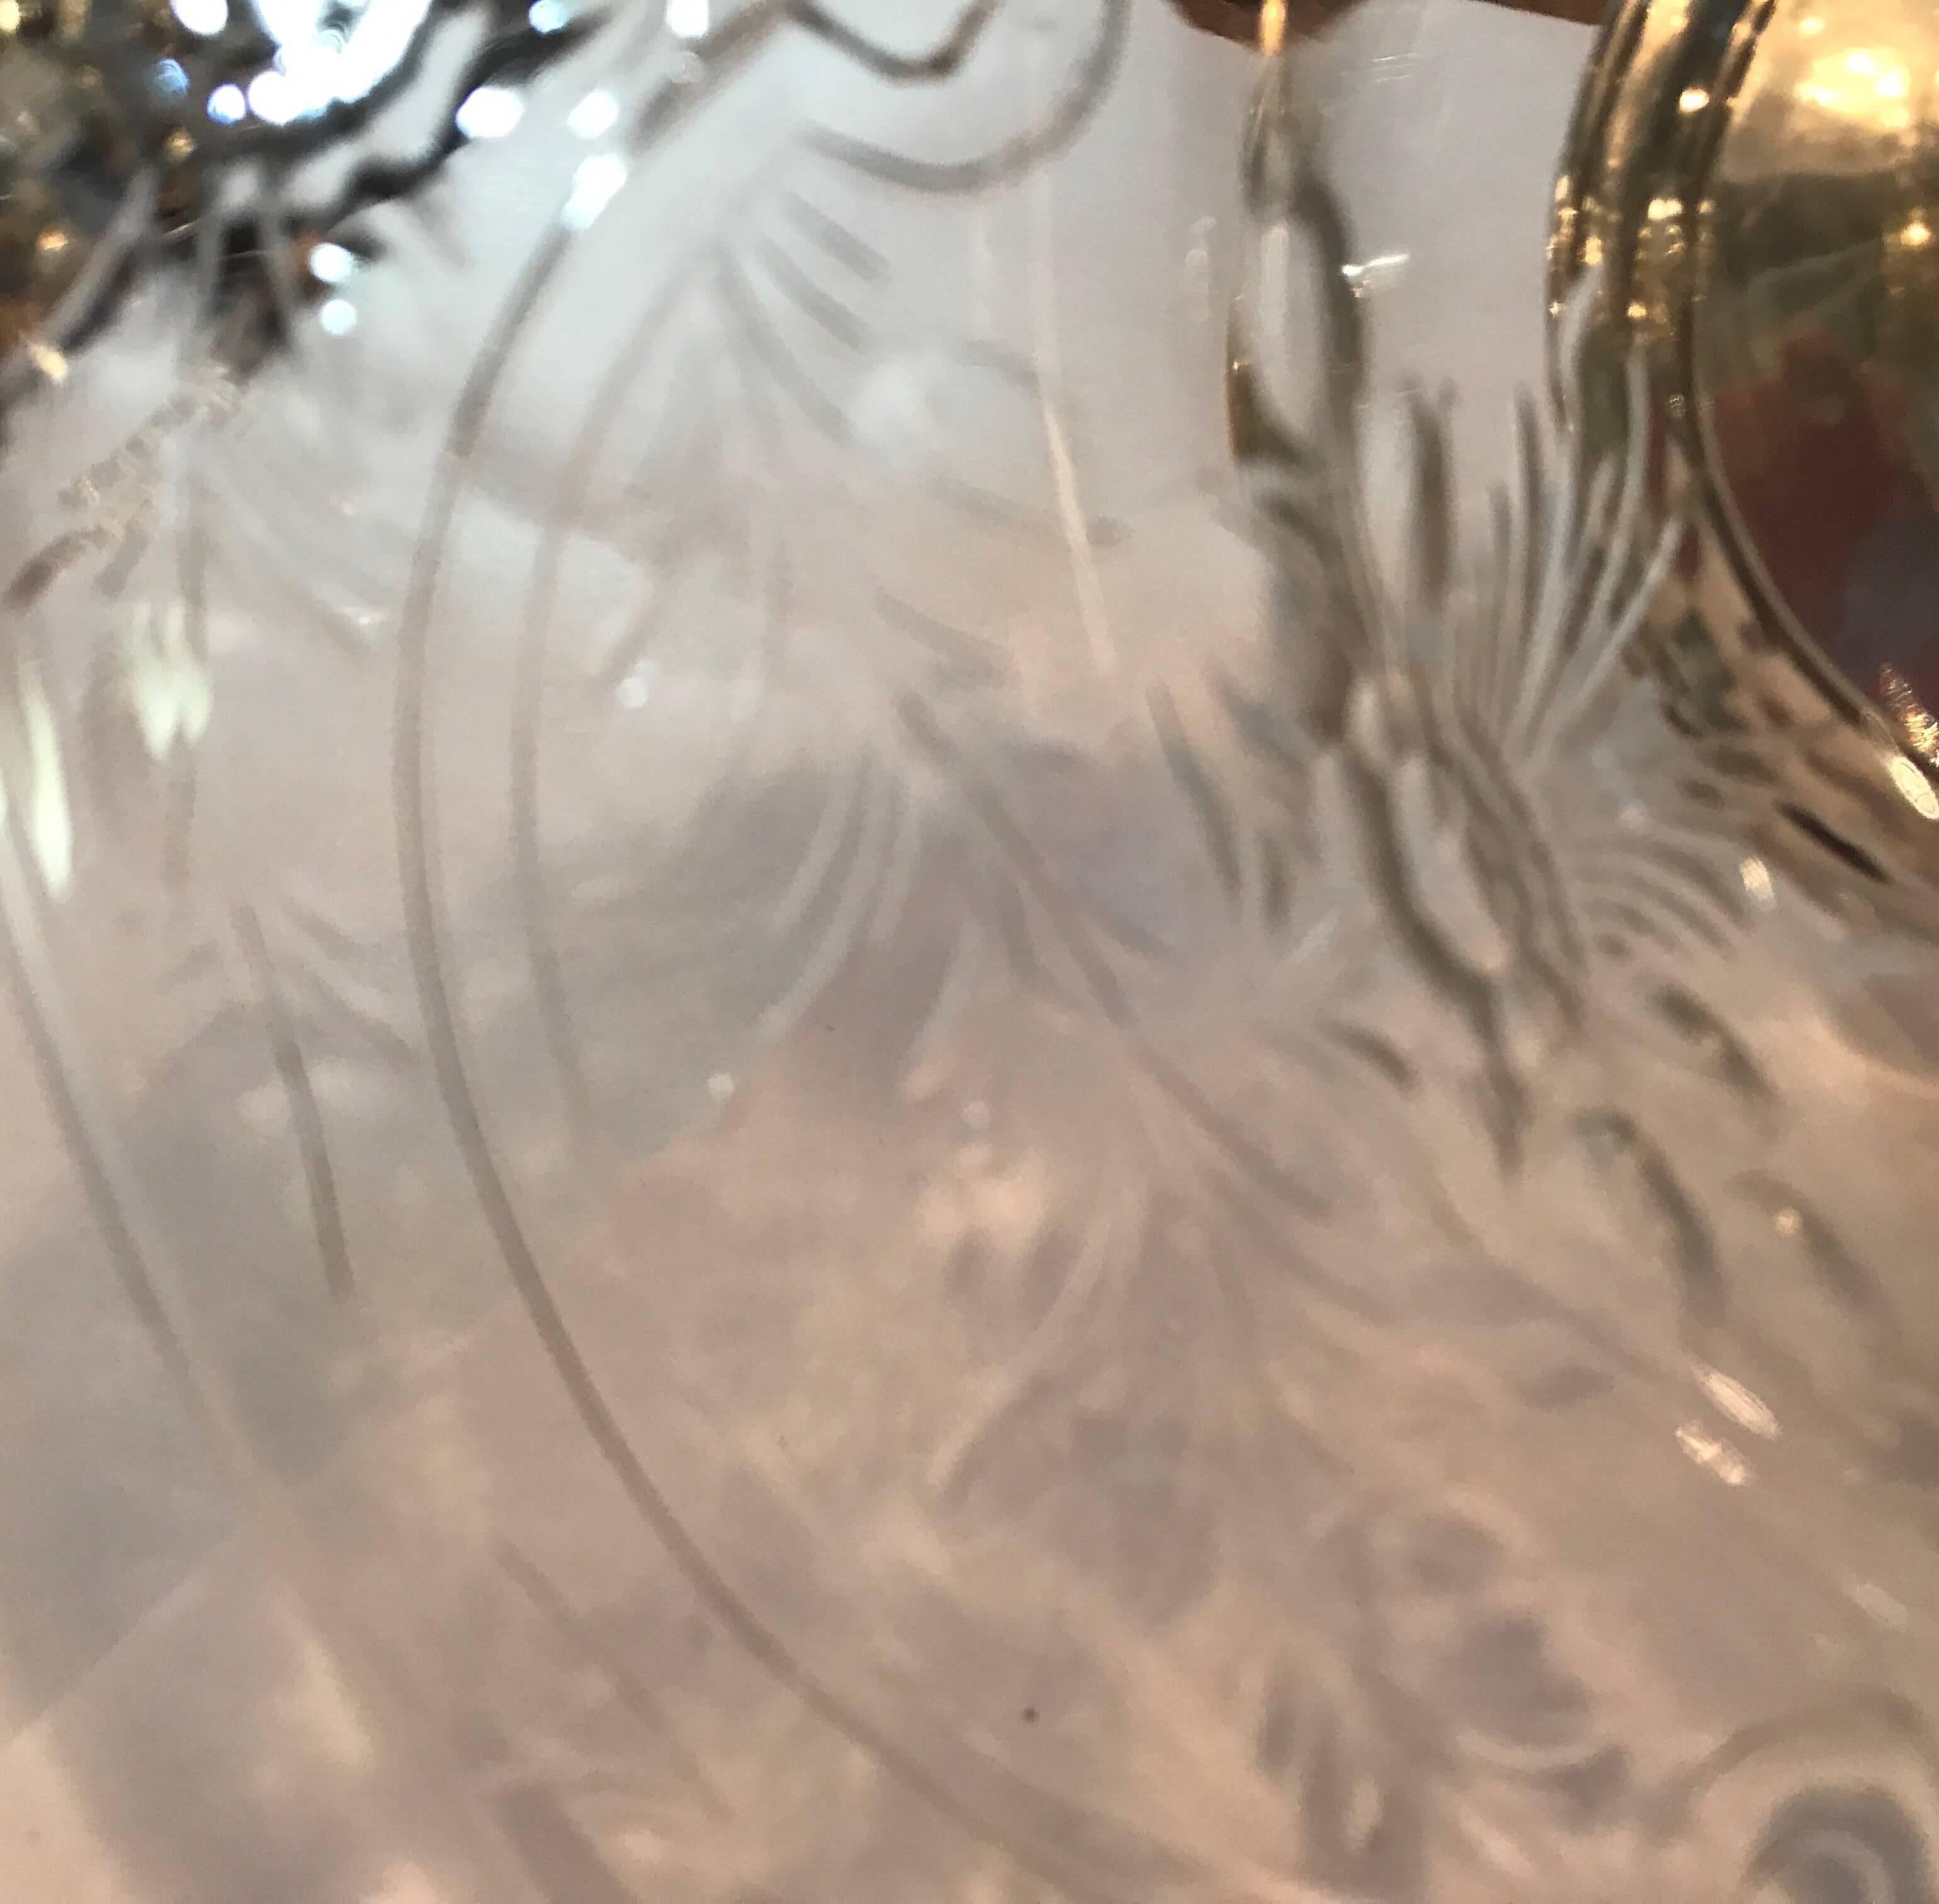 Intaglio cut glass centre bowl with sterling silver pedestal base signed by Hawkes.
Thomas Gibbons Hawkes founded what was probably this country’s most successful factory devoted exclusively to the cutting of glass. It certainly had the longest